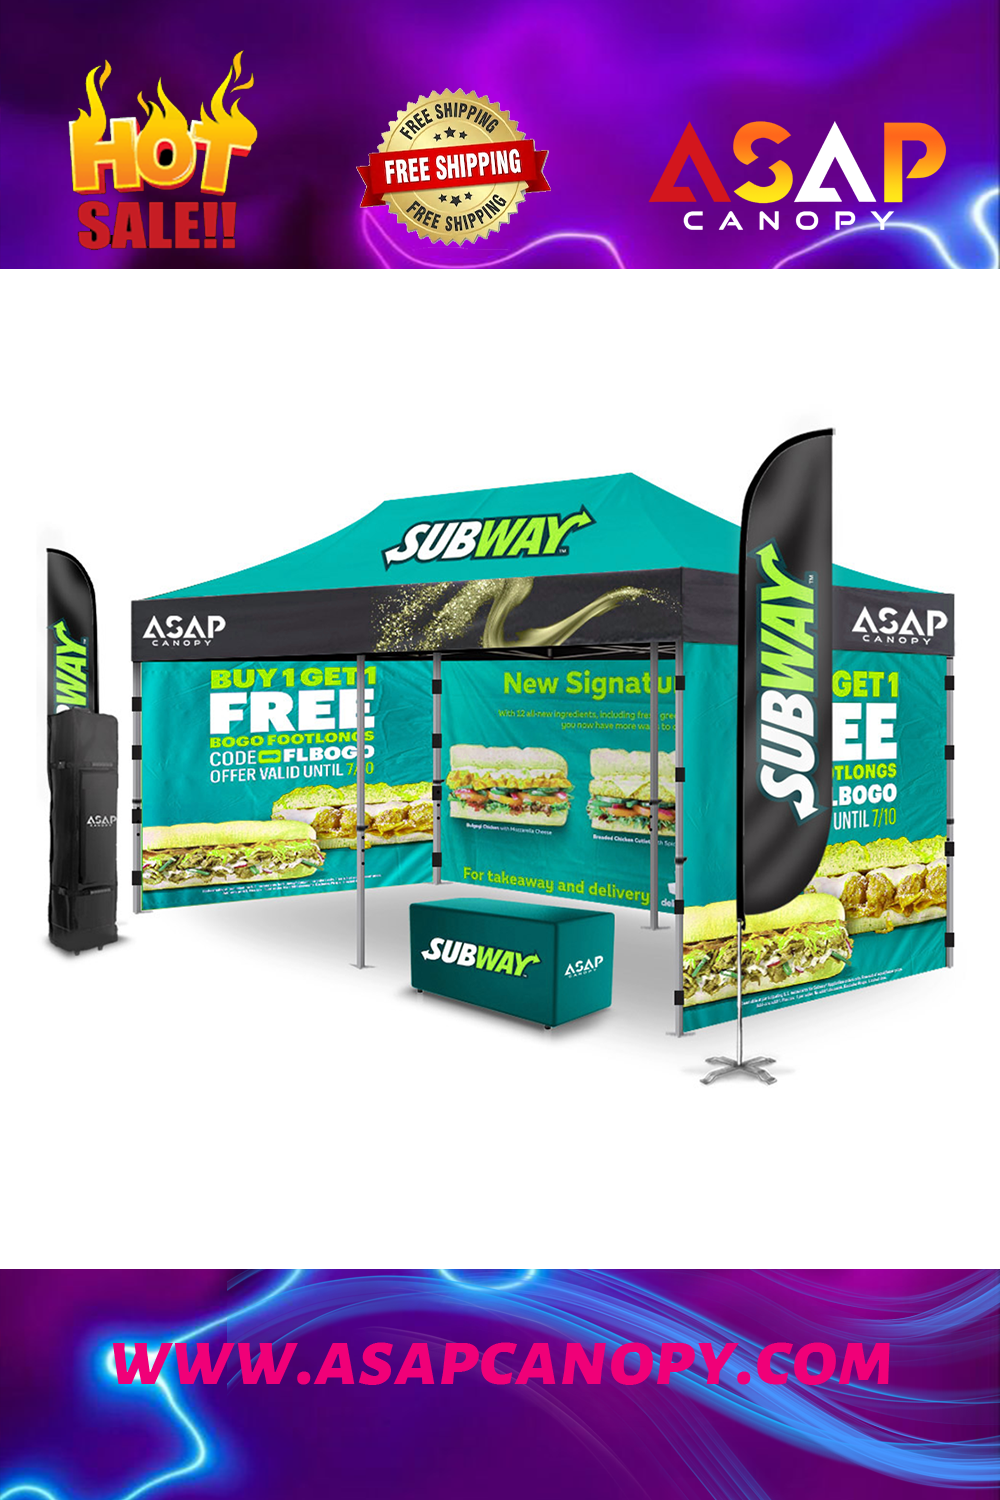 Canopy Tent Logo：10×20 Trade Show Tents With Logo